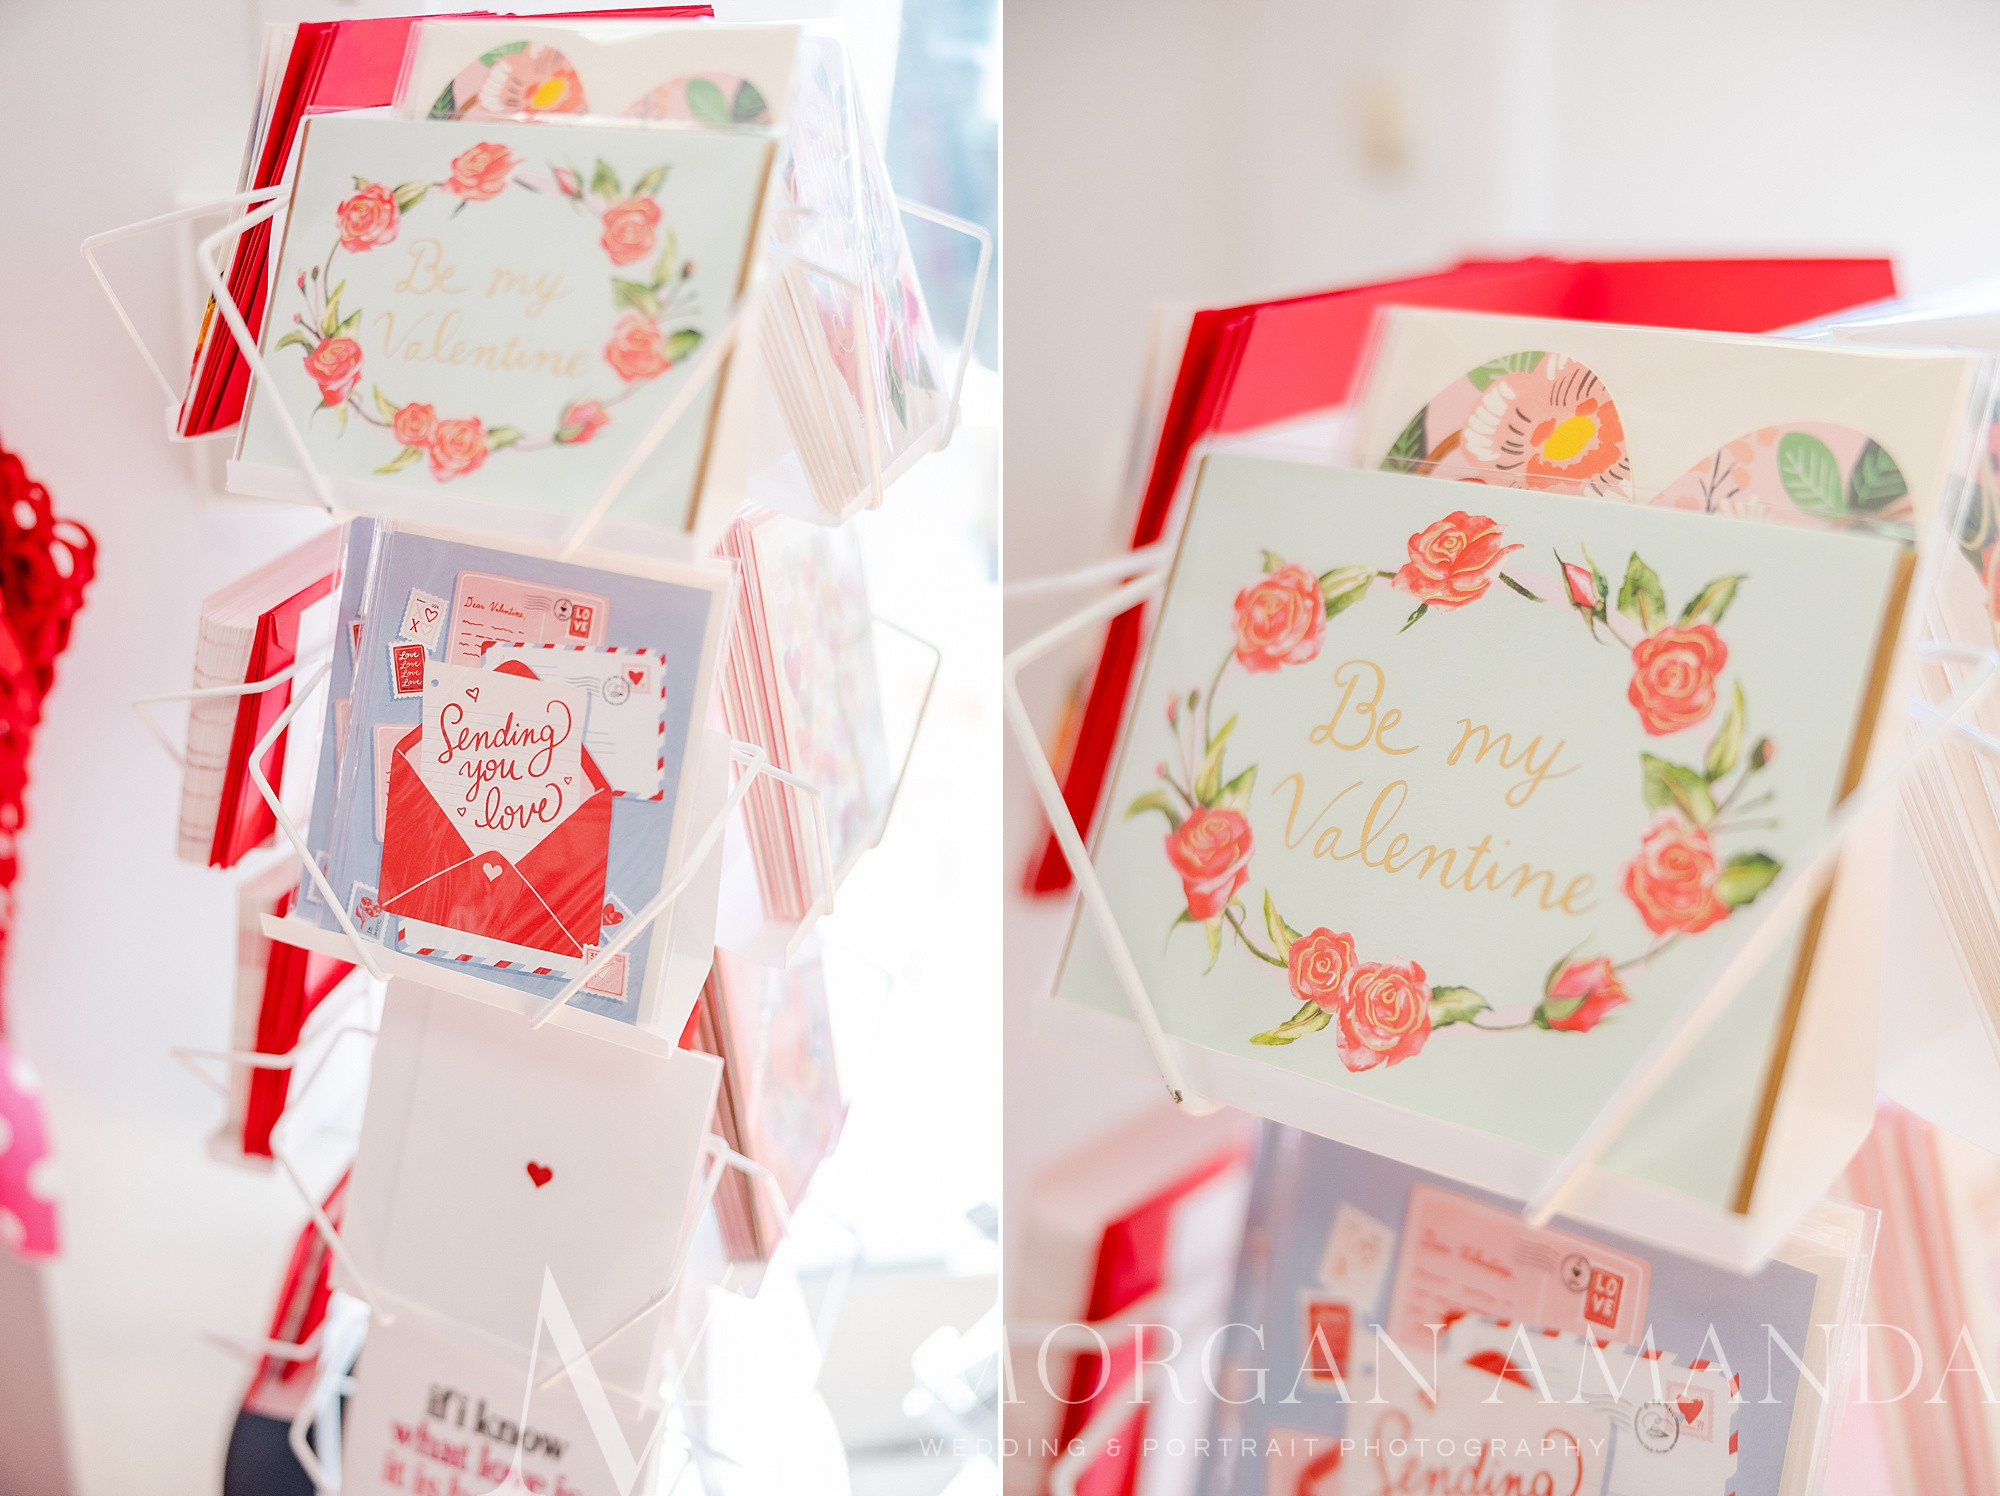 greeting cards on display during Galentine's Event at The Social Shop